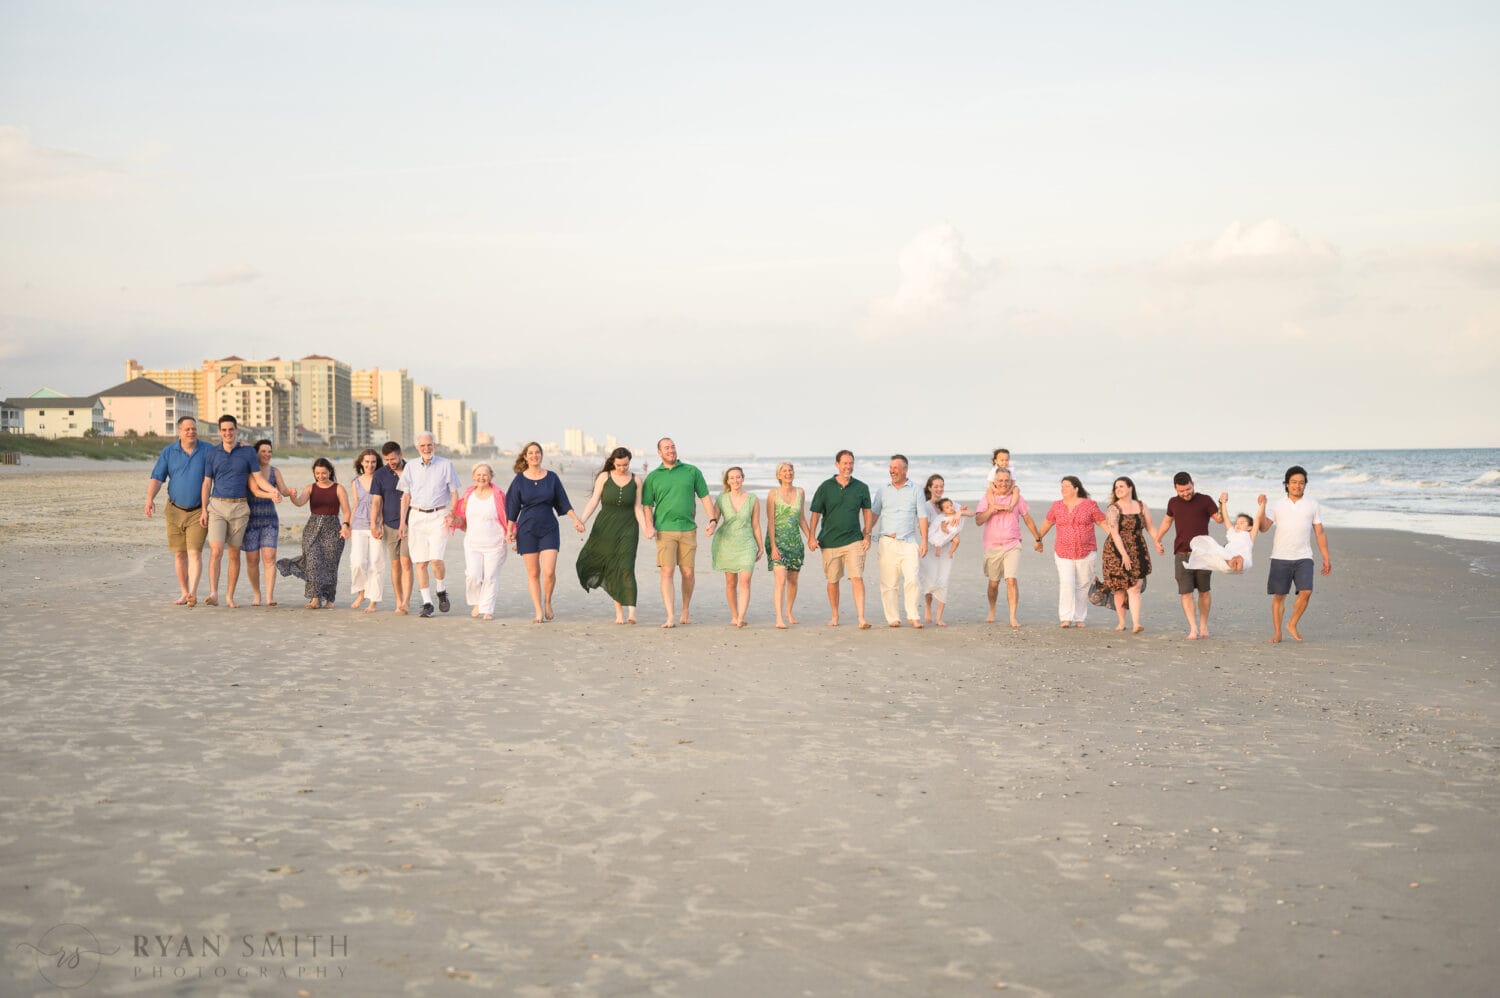 Large family group having fun by the ocean - North Myrtle Beach